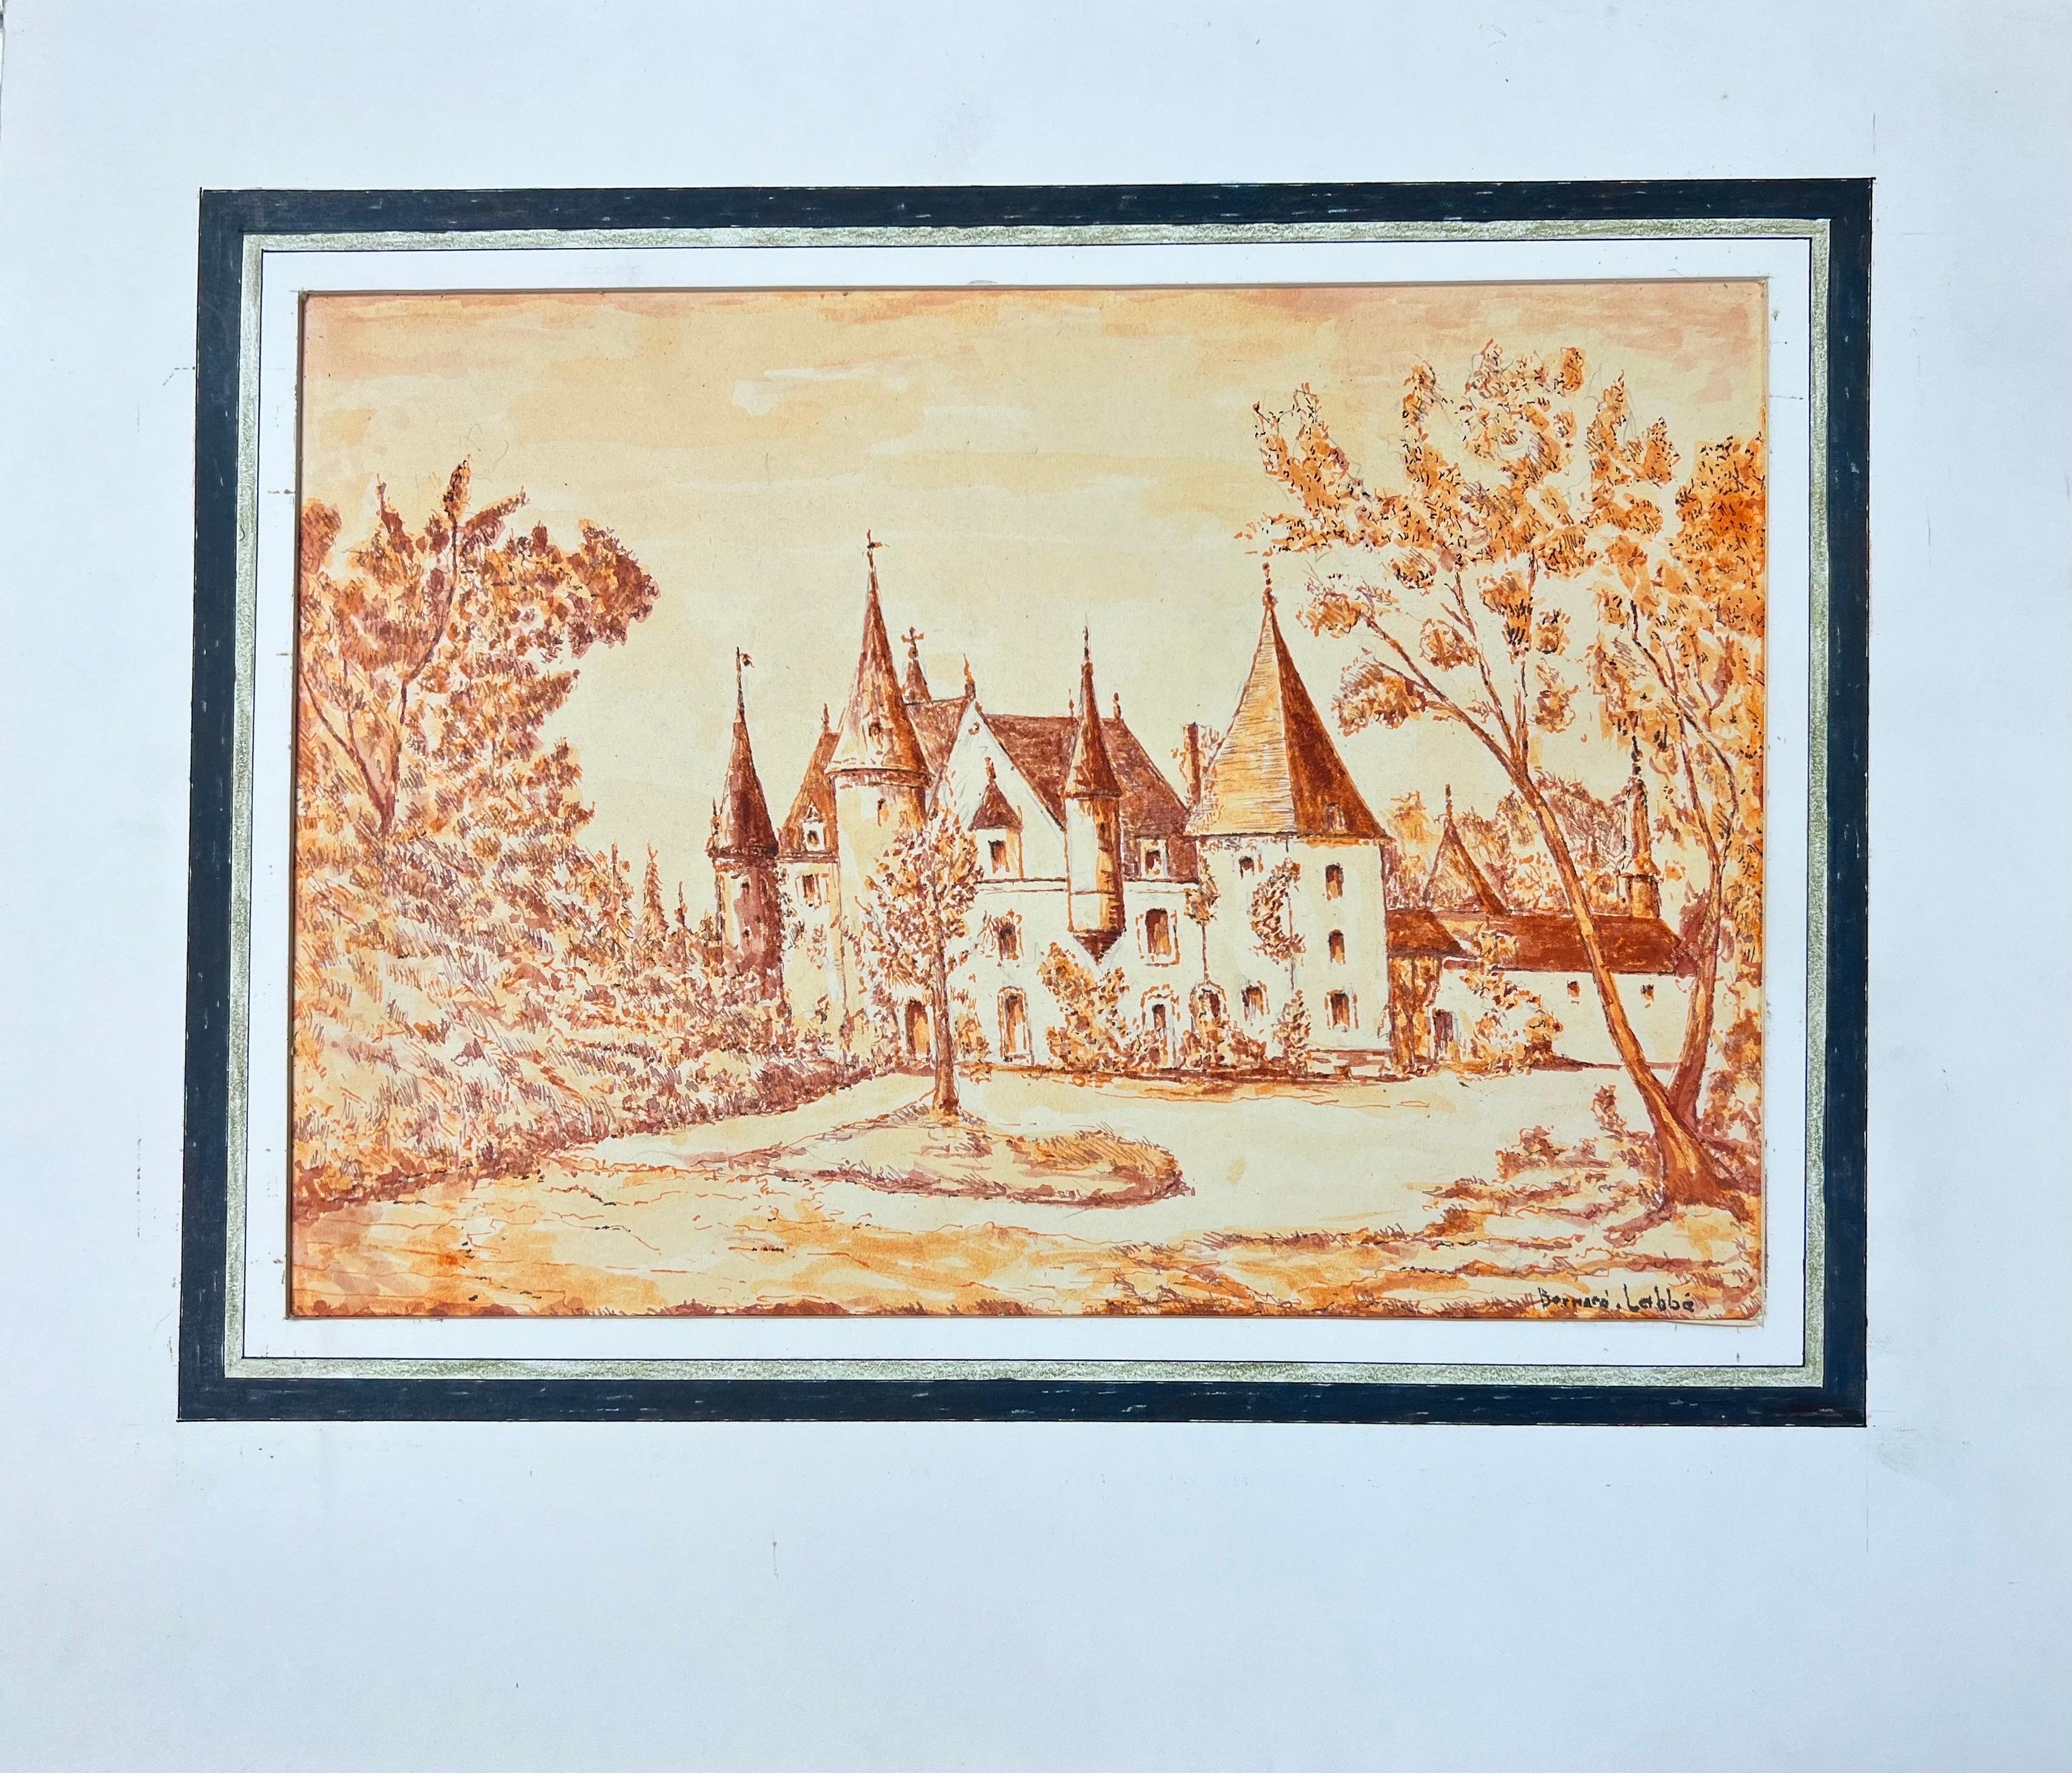 1950's Modernist/ Cubist Painting - Orange Autumnal French Chateau - Art by Bernard Labbe